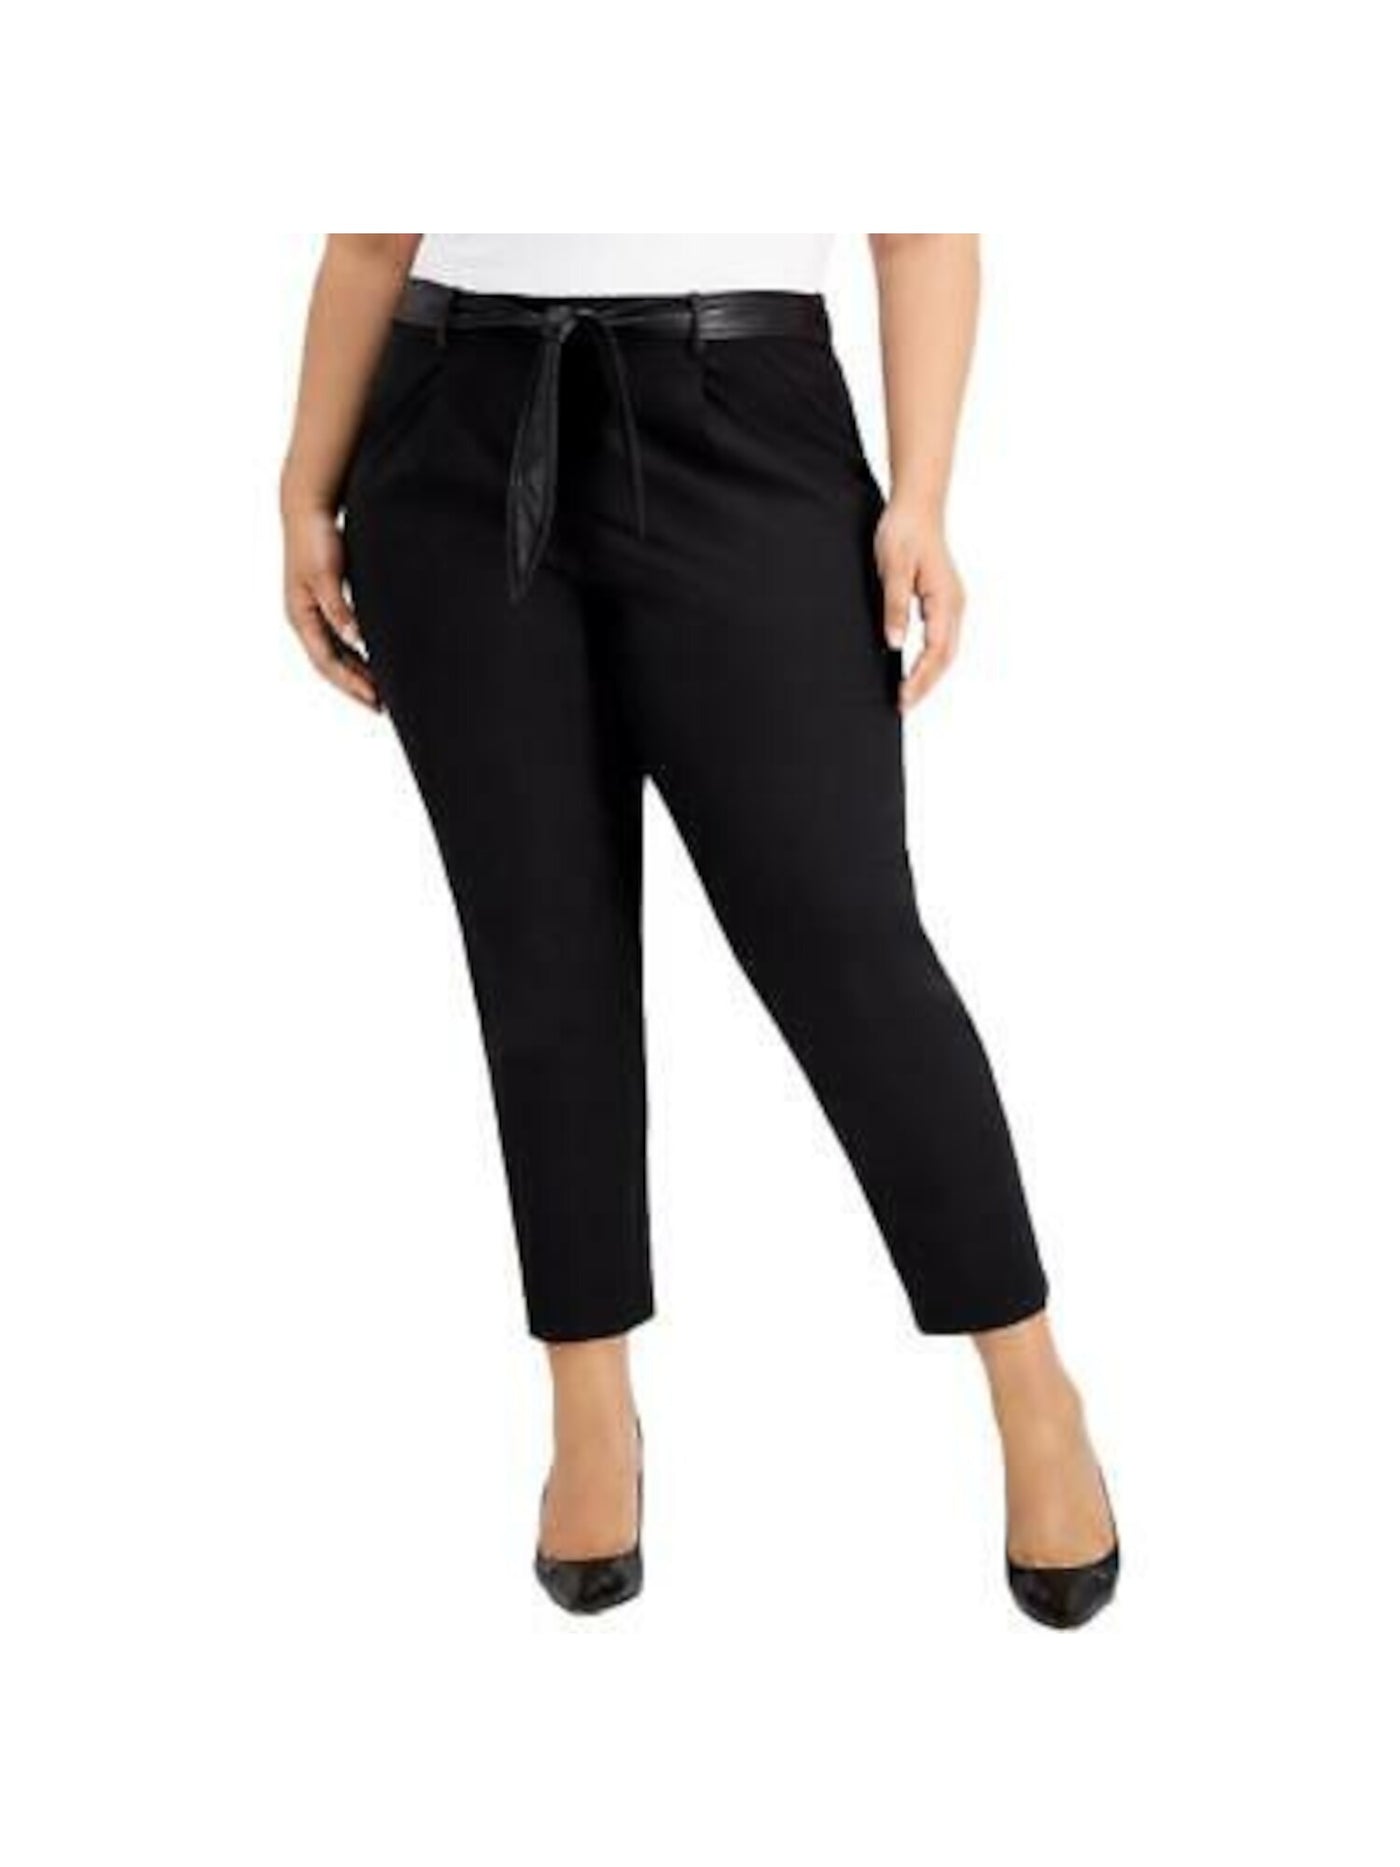 CALVIN KLEIN Womens Black Stretch Belted Zippered Wear To Work Cropped Pants Plus 24W